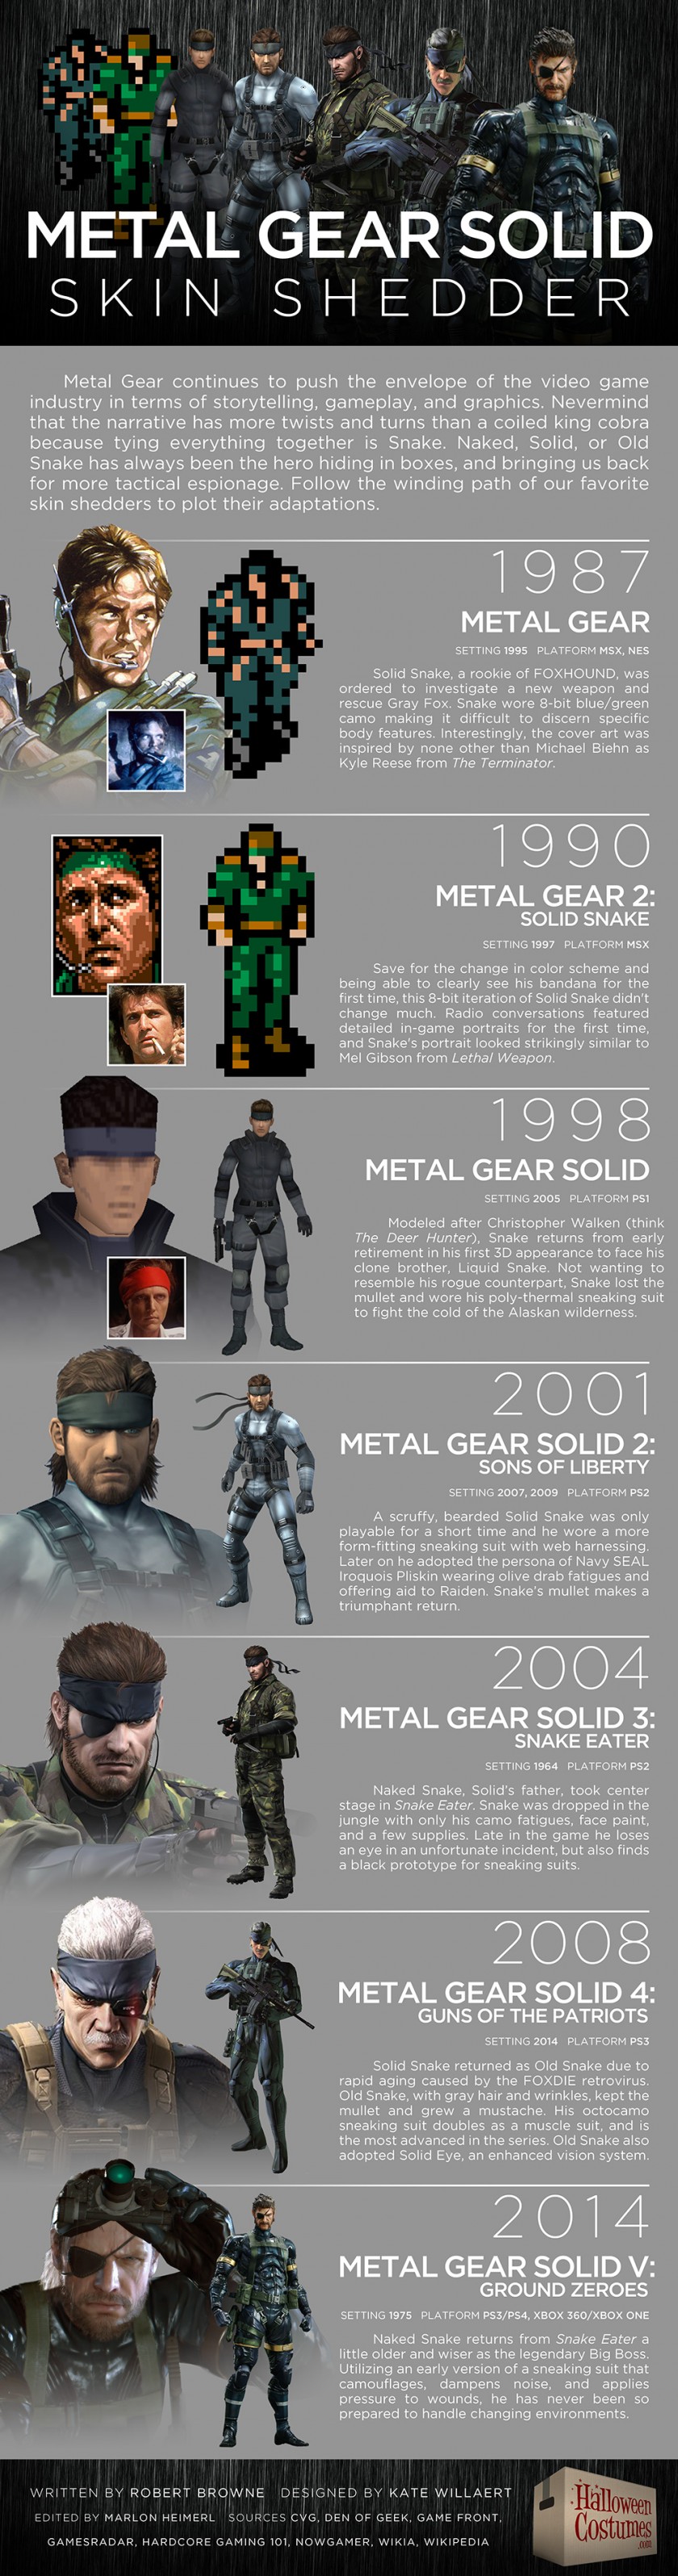 Metal Gear Solid Infographic